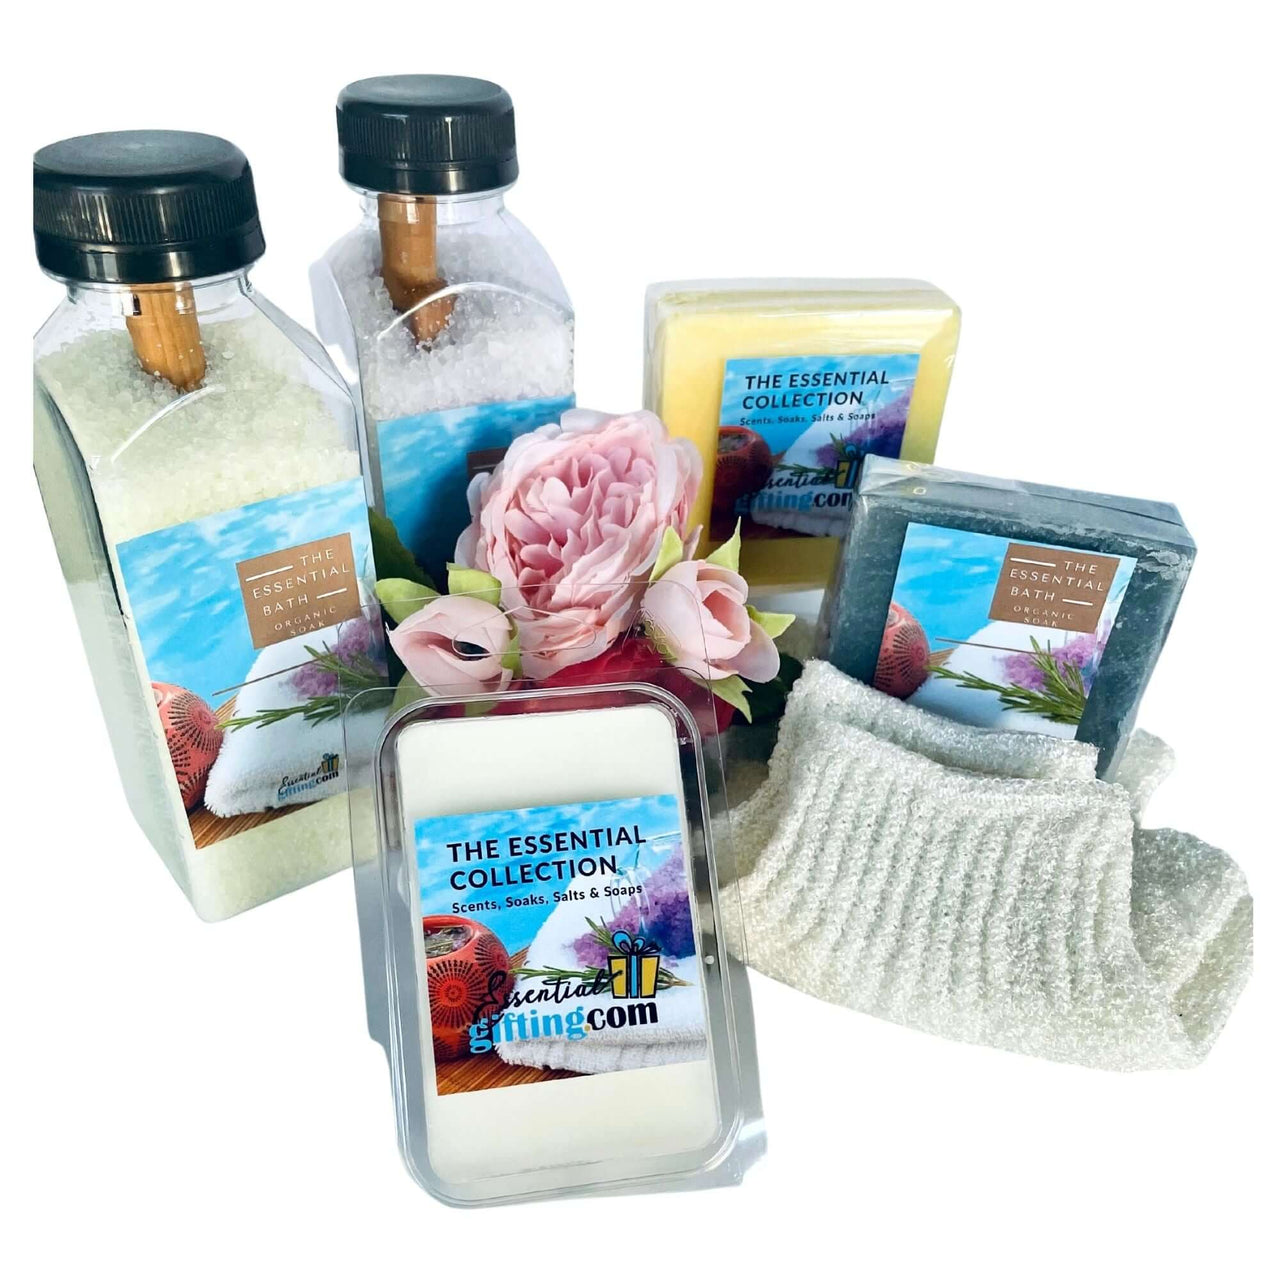 Relaxing bath essentials gift set: artisanal bath salts, luxurious soaps, soft towels, and soothing floral accents for pampering self-care experience.